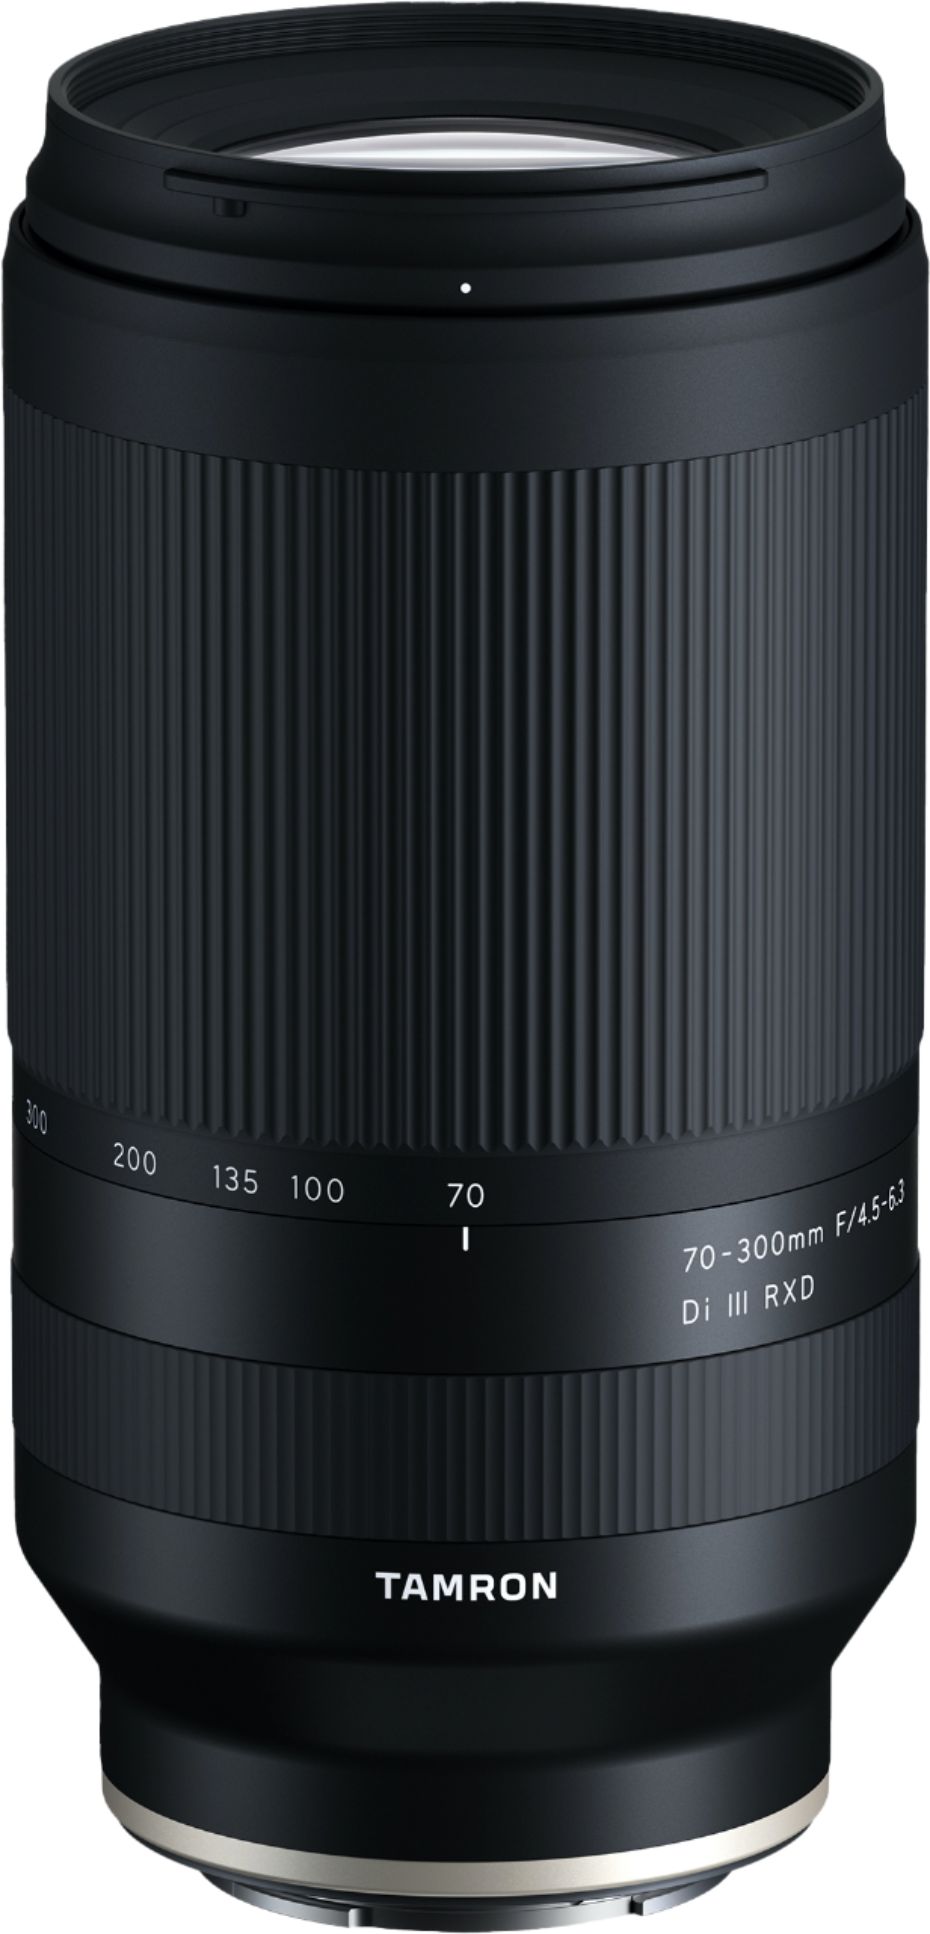 Tamron 70-300mm F/4.5-6.3 Di III RXD Telephoto Zoom Lens for Sony E-Mount  AFA047S700 - Best Buy